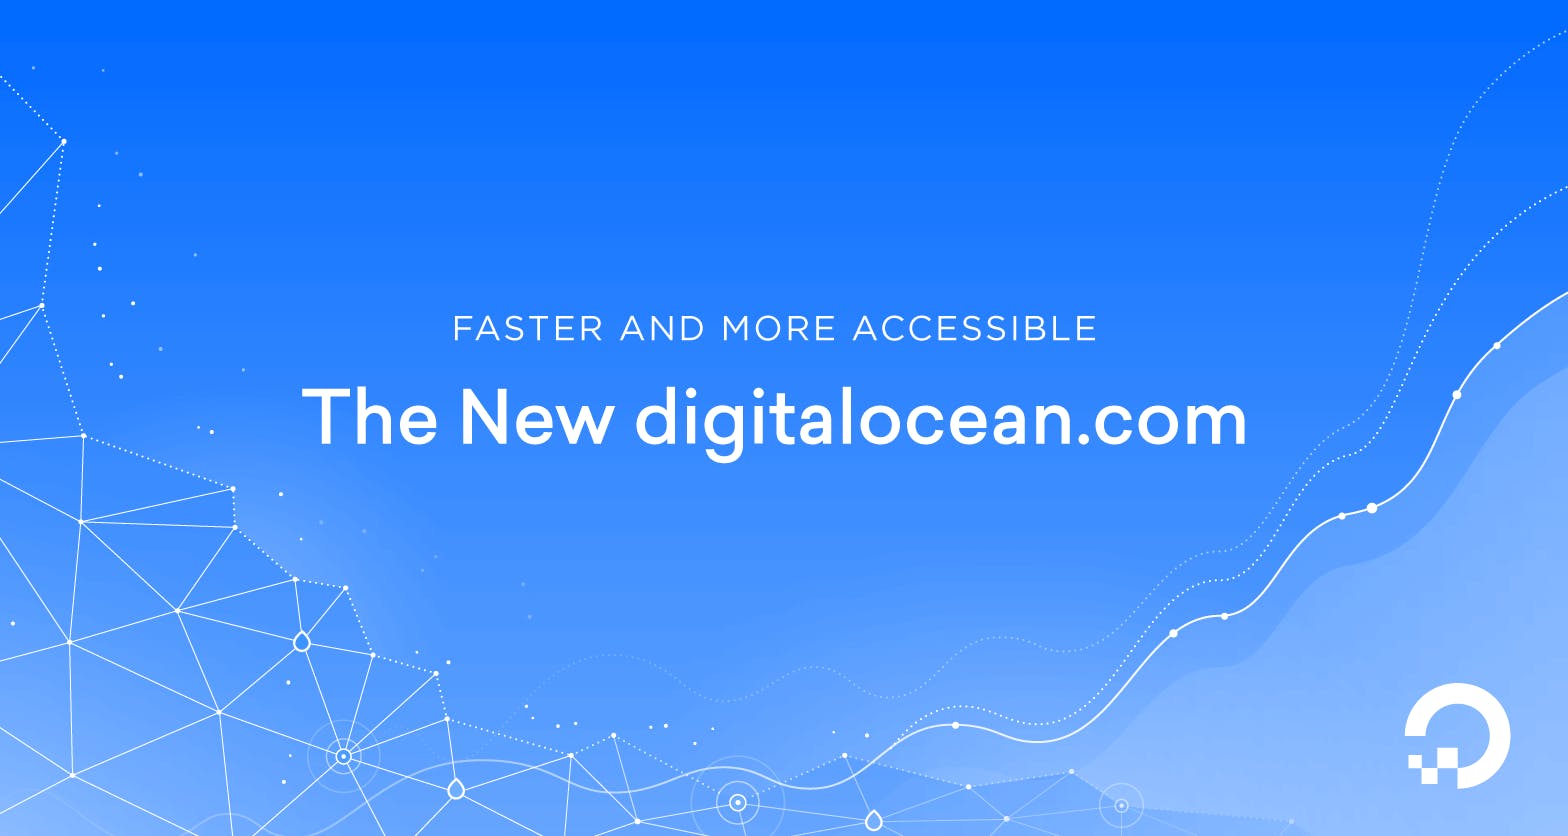 Faster and More Accessible: The New digitalocean.com